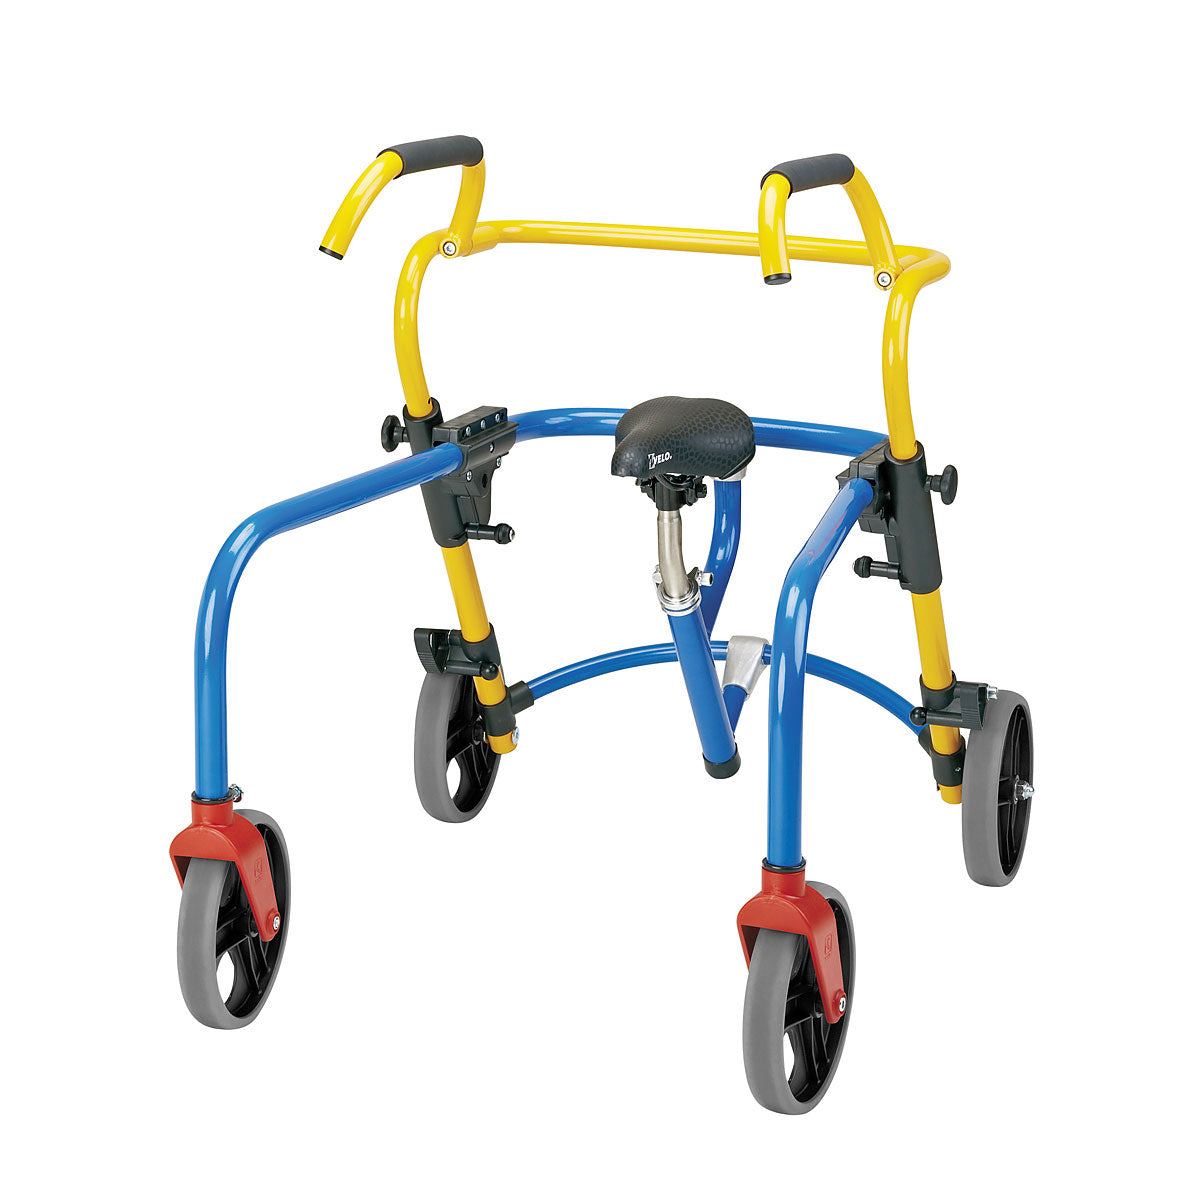 Rebotec Pluto - Child Reverse Walker - Small With Seat